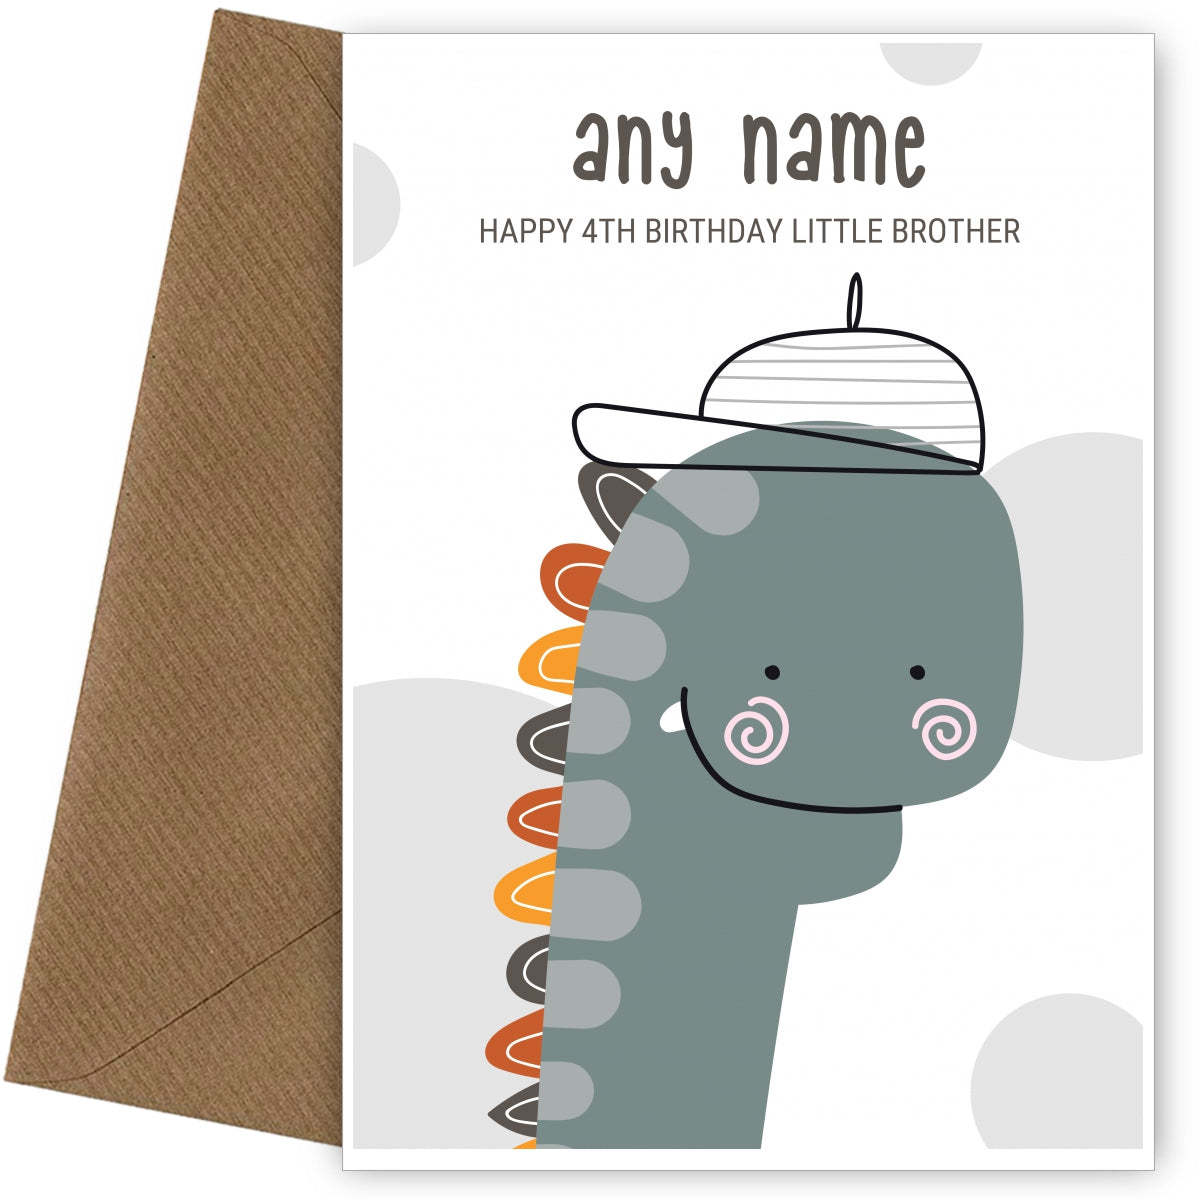 Happy 4th Birthday Card for Little Brother - Dinosaur with Cap